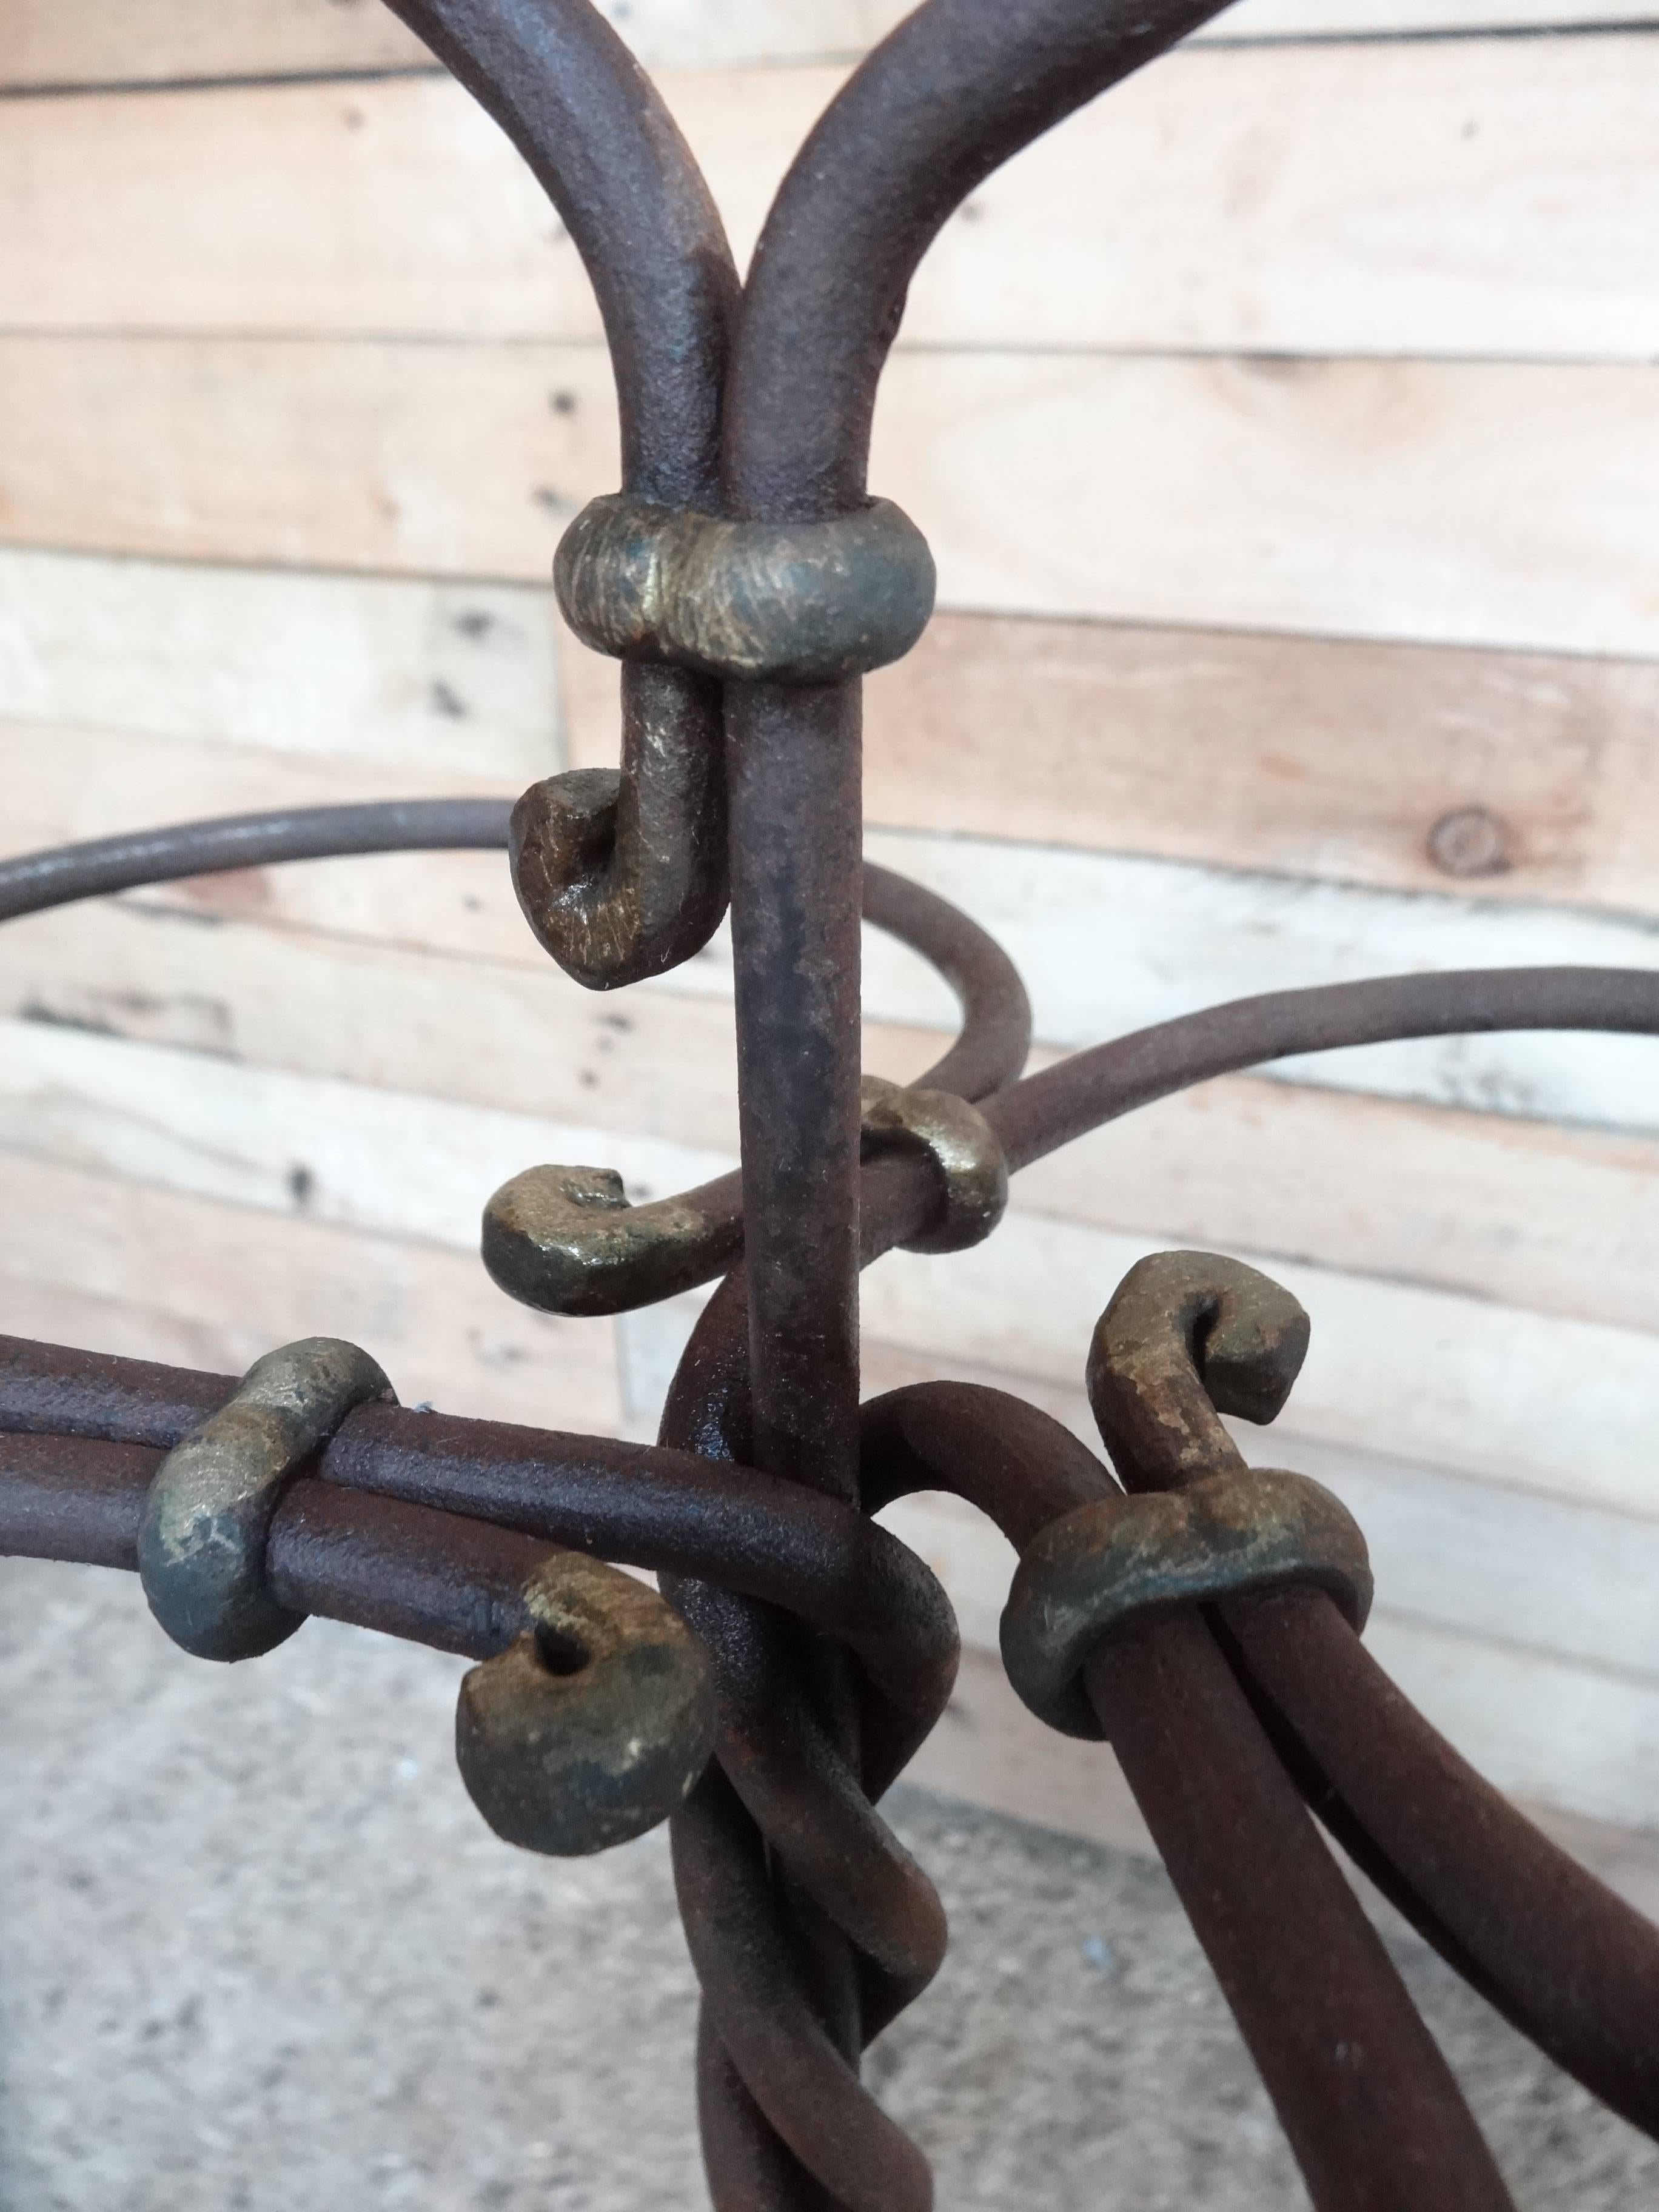 19th Century Sought After circa 1880 Vintage French Wrought Iron Umbrella Stand